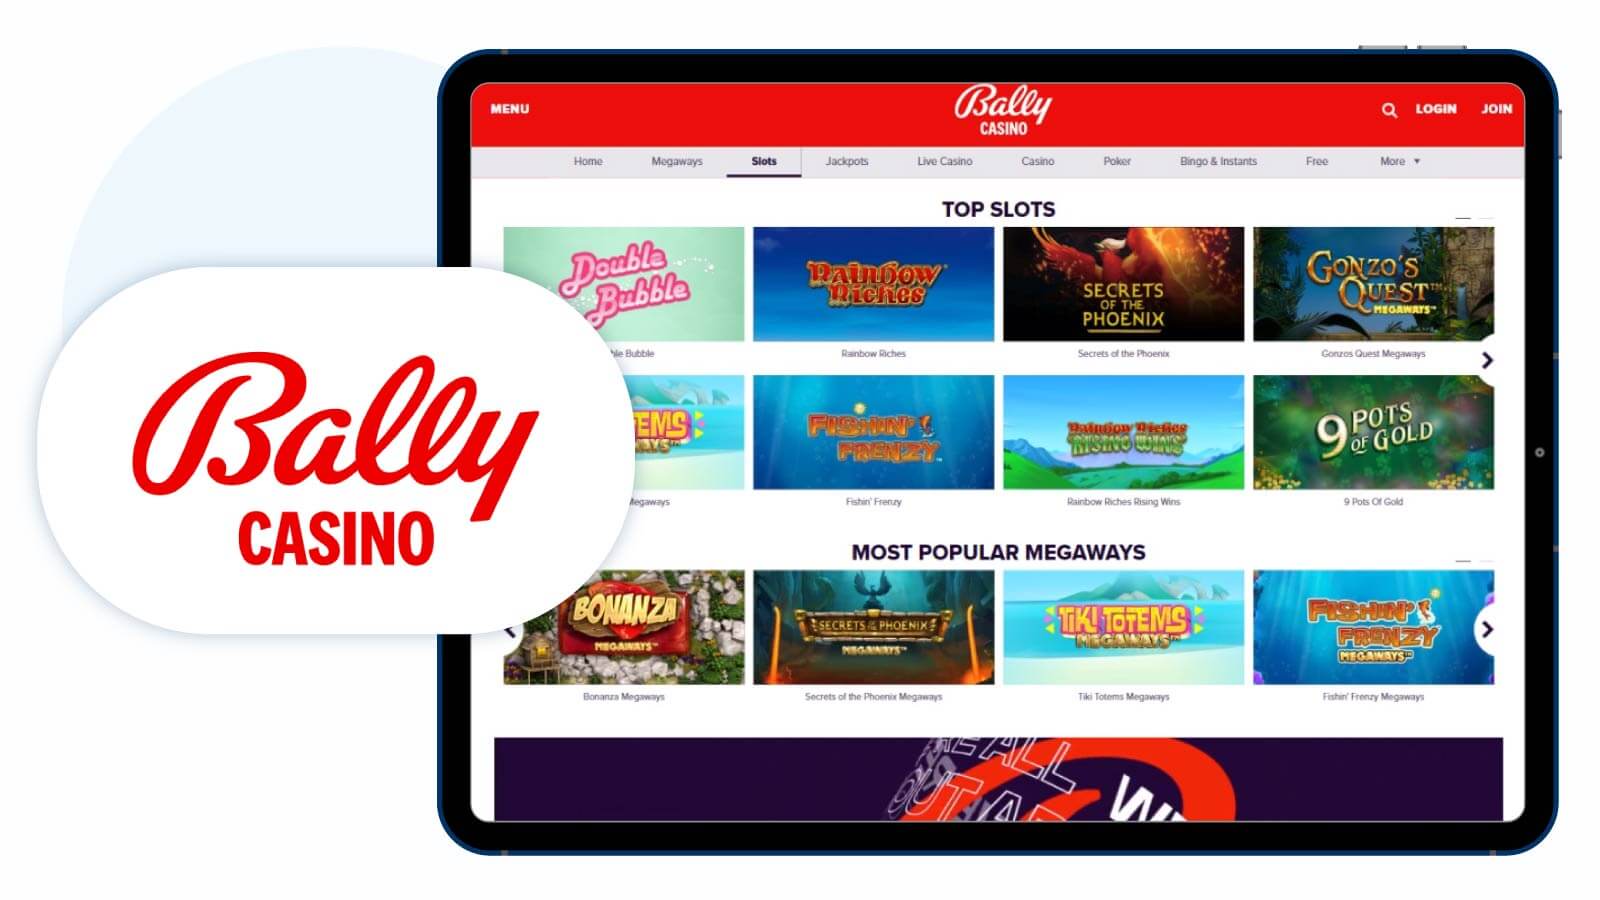 Bally-Casino-Top-Offers-with-£10-Minimum-Deposit-with-Visa